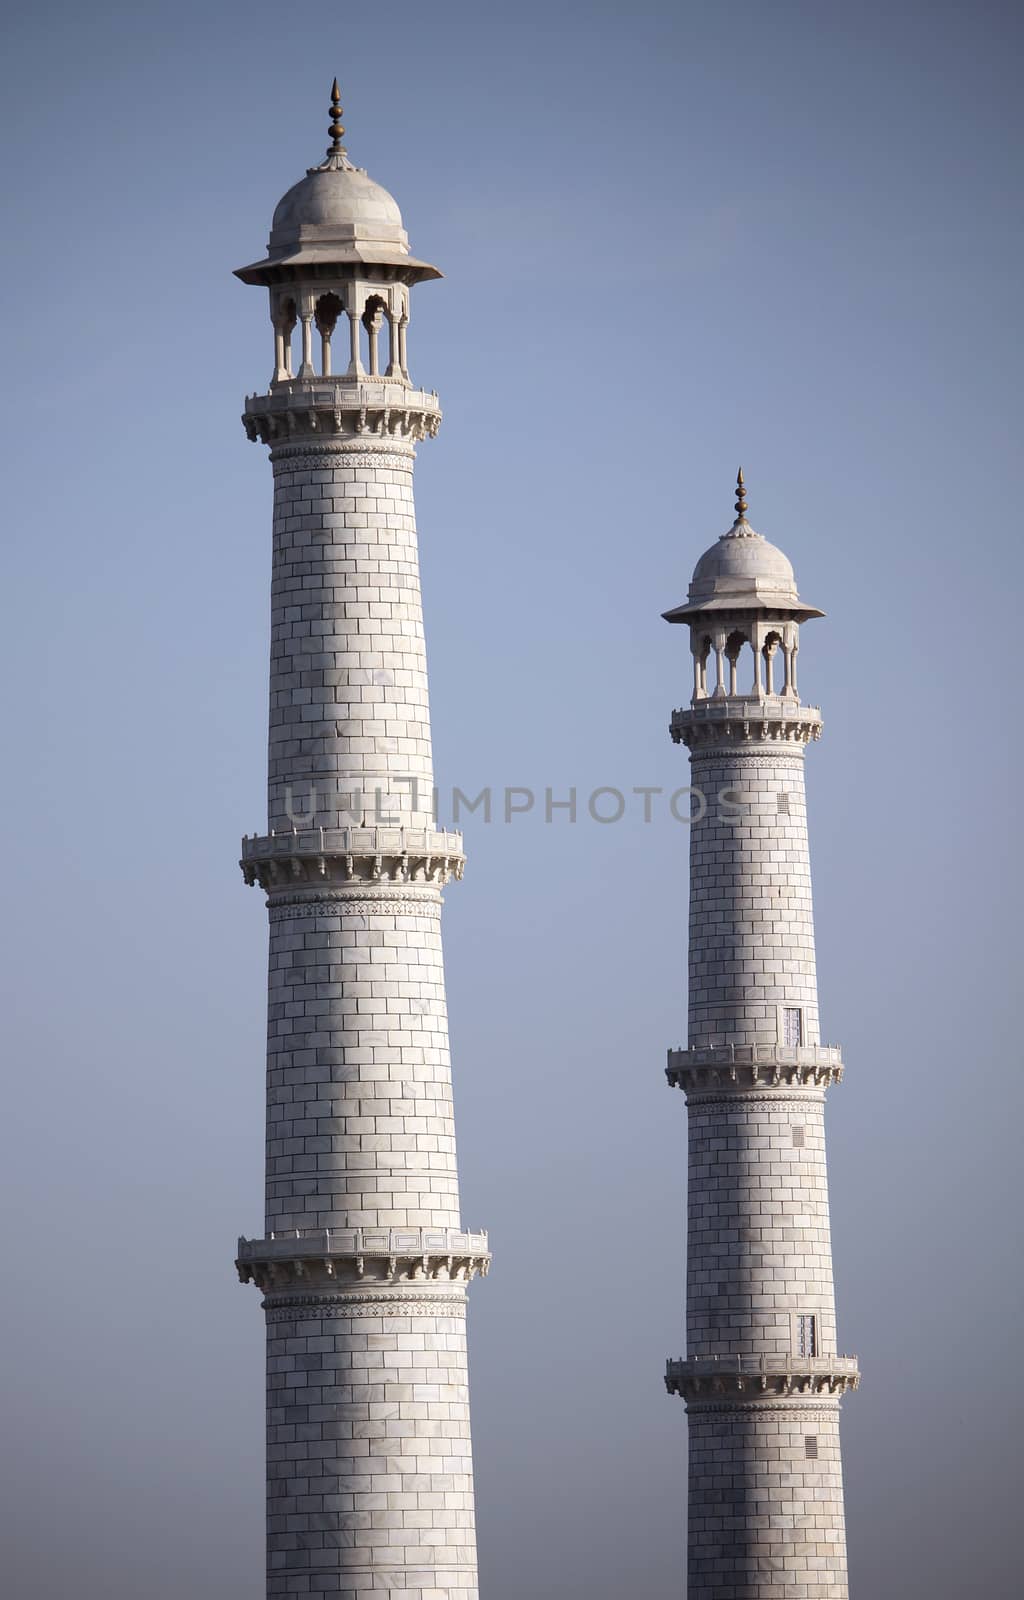 The view of the minarets of the Taj made of white marble in Agra, India.